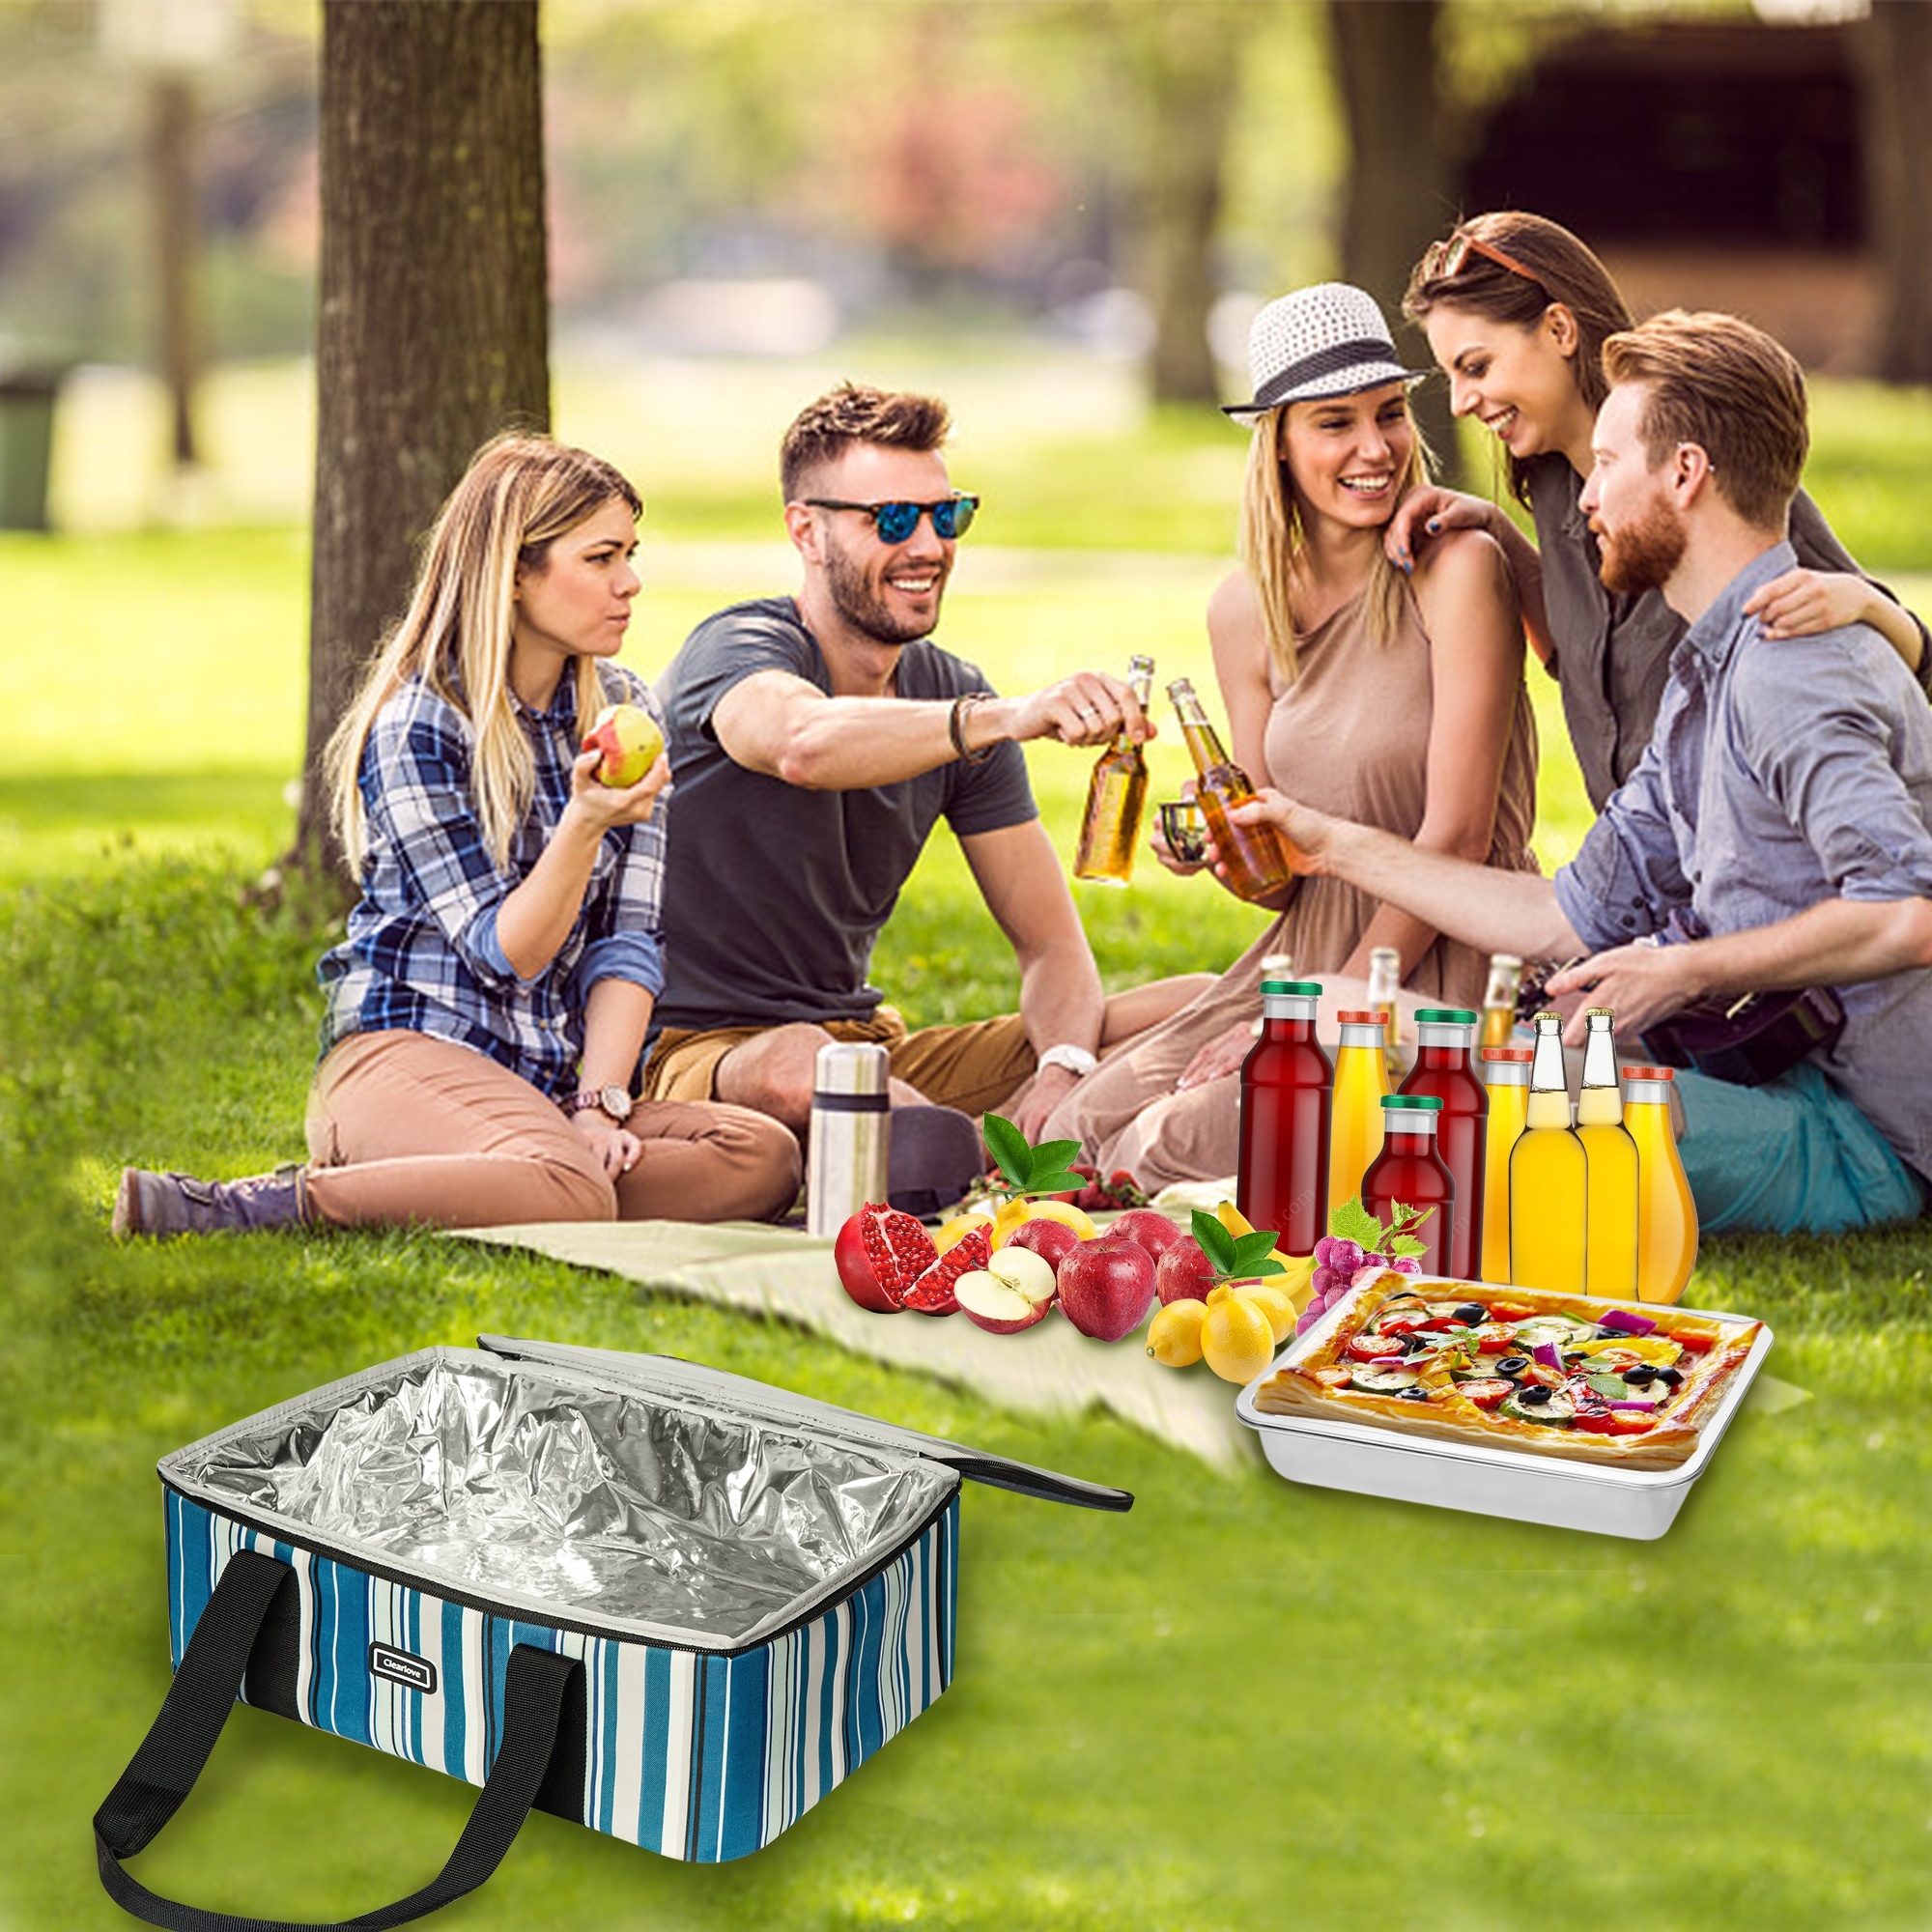 https://ak1.ostkcdn.com/images/products/is/images/direct/5b26692273677a20a10f9e7bc43c823192f340cd/Insulated-Casserole-Carrier-Thermal-Lunch-Bag-for-Hot-Cold-Food.jpg